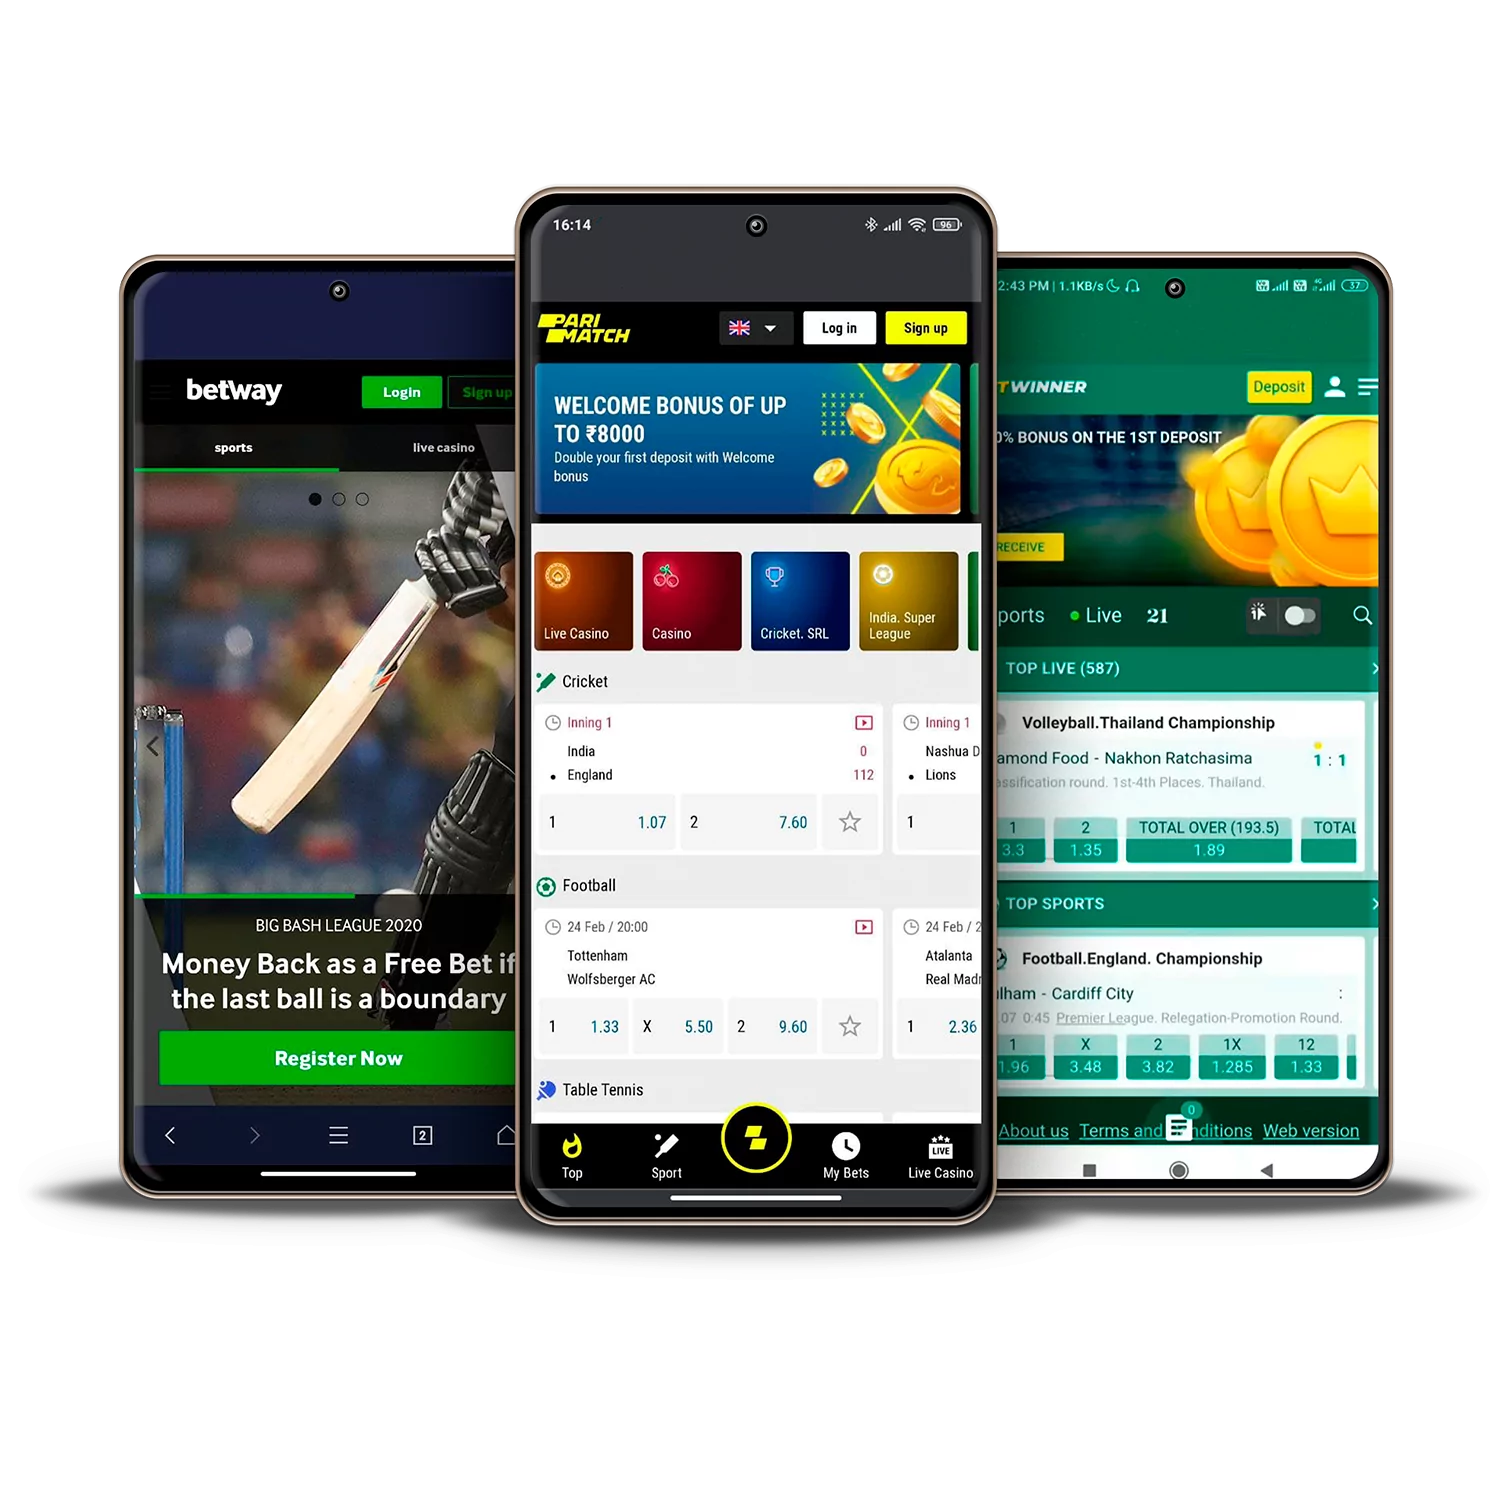 Open The Gates For Online Betting App By Using These Simple Tips